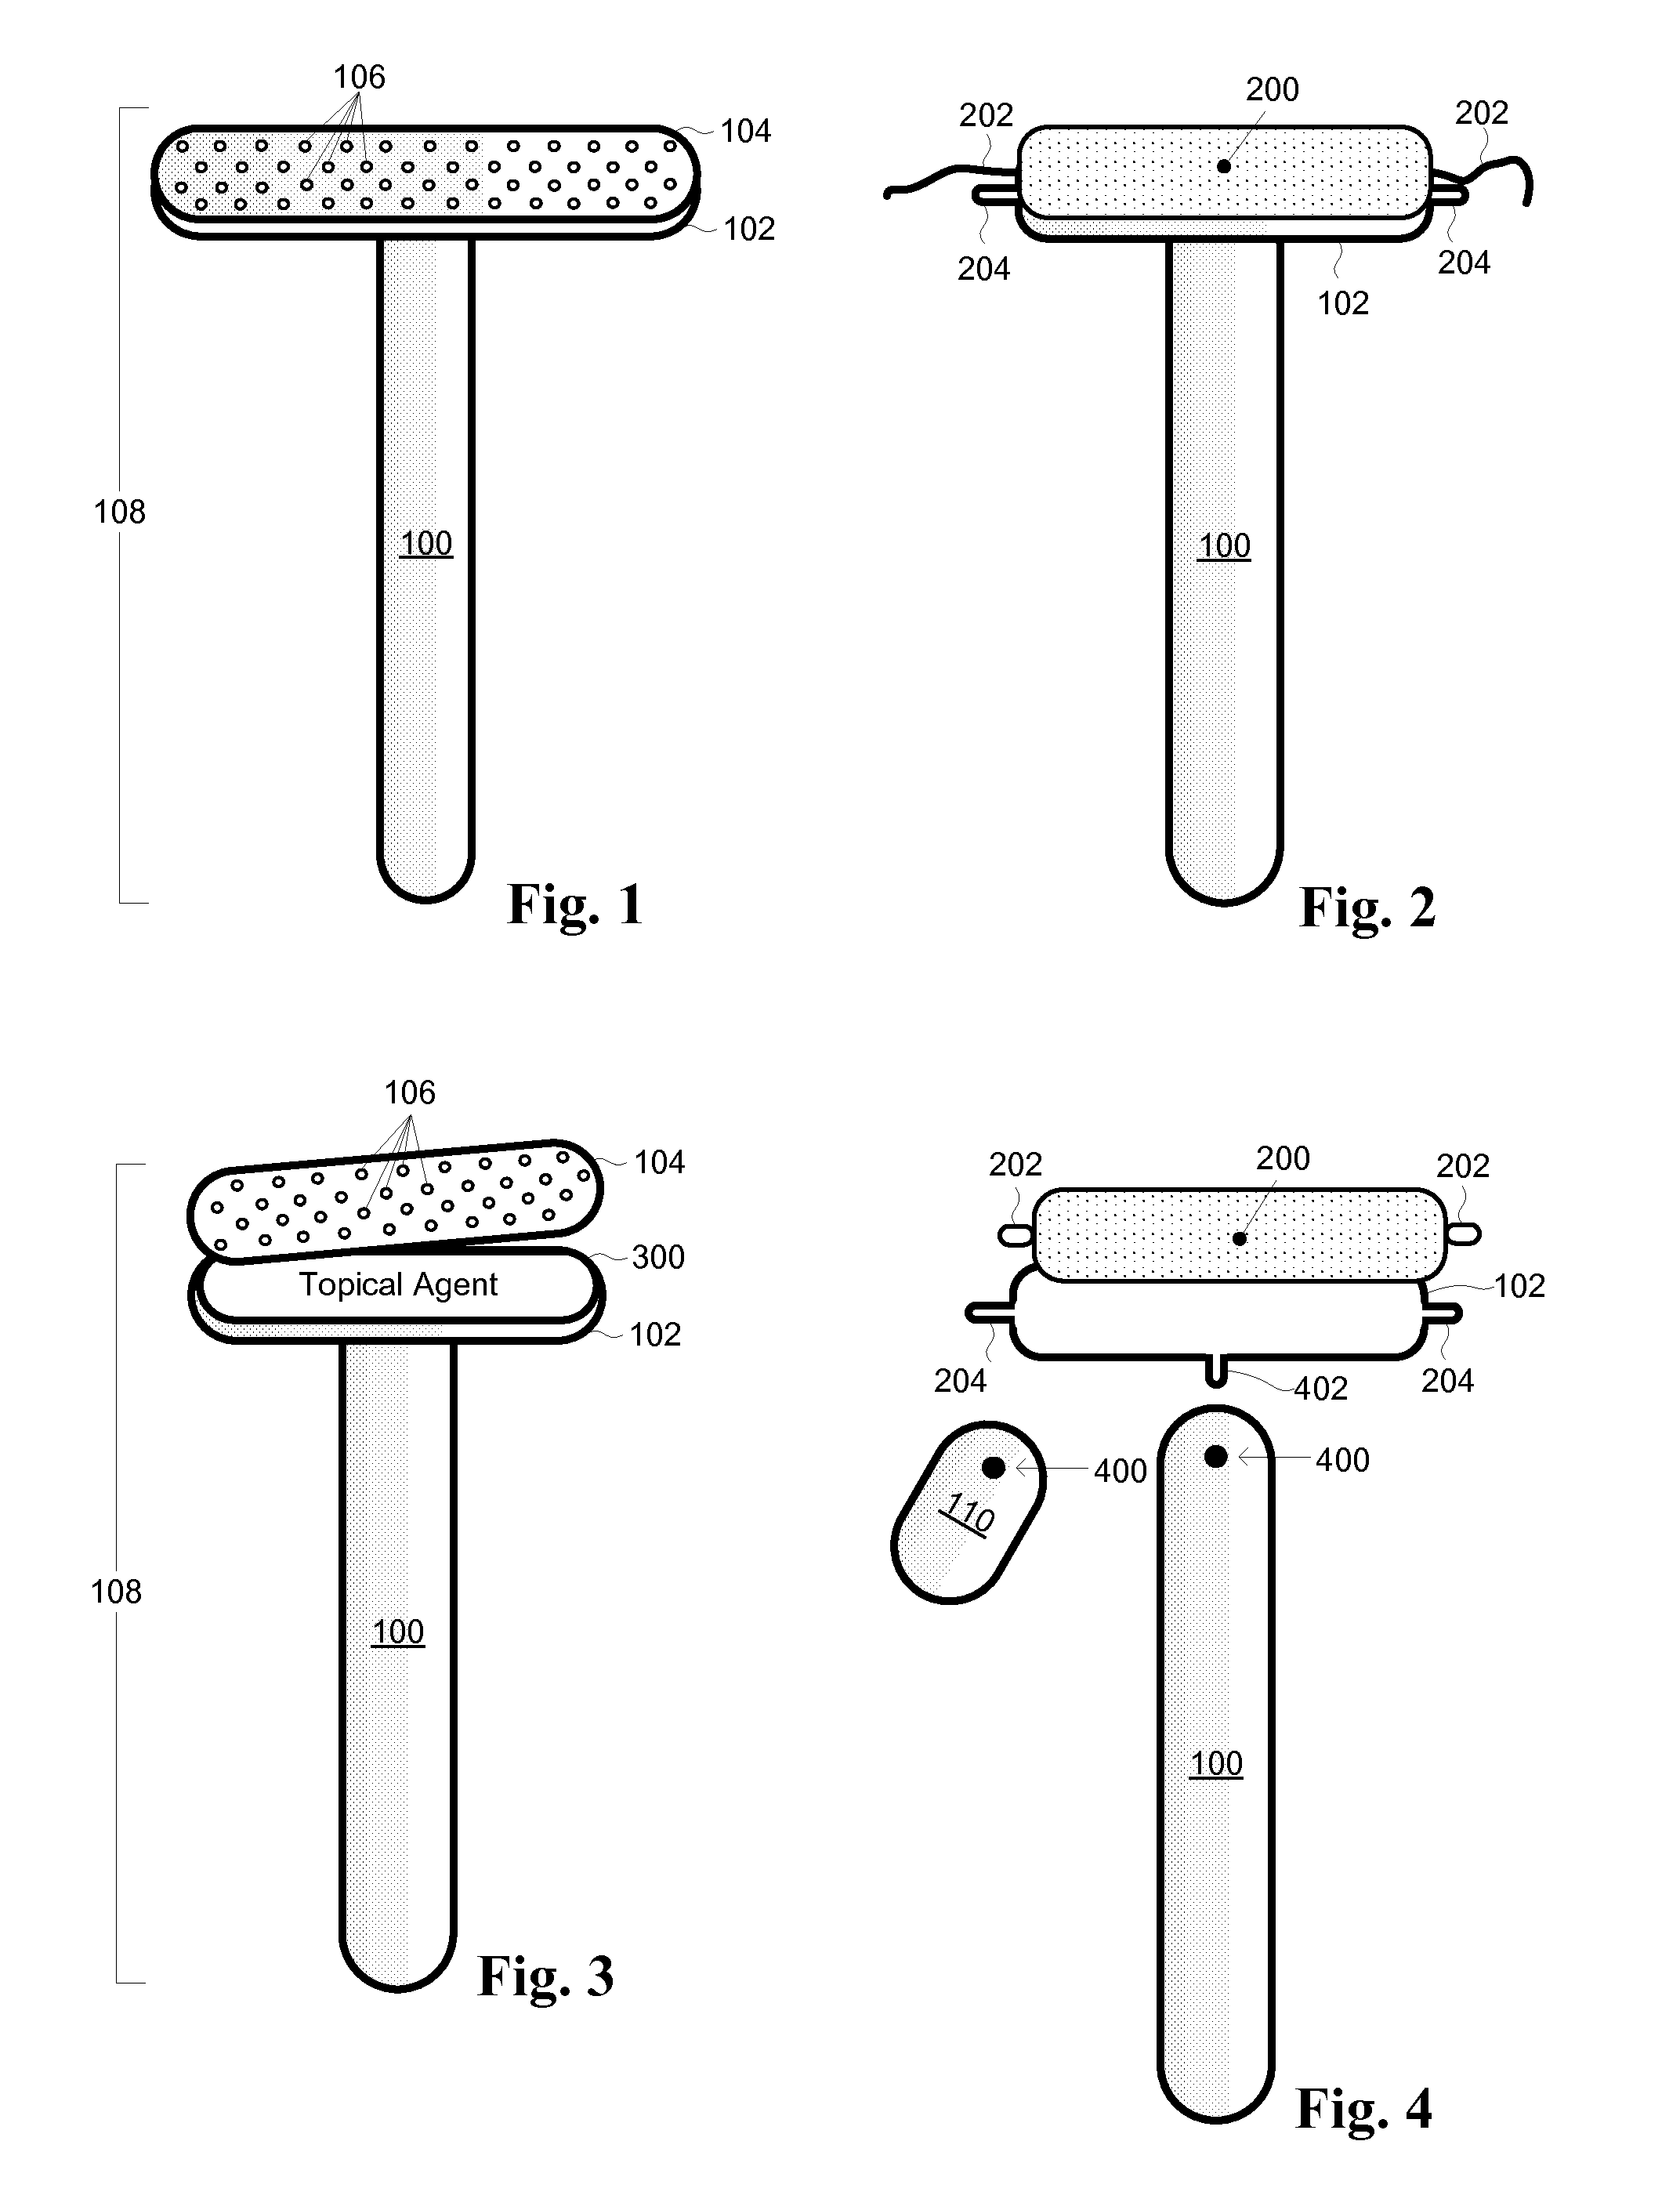 Interchangeable applicator for topical agents